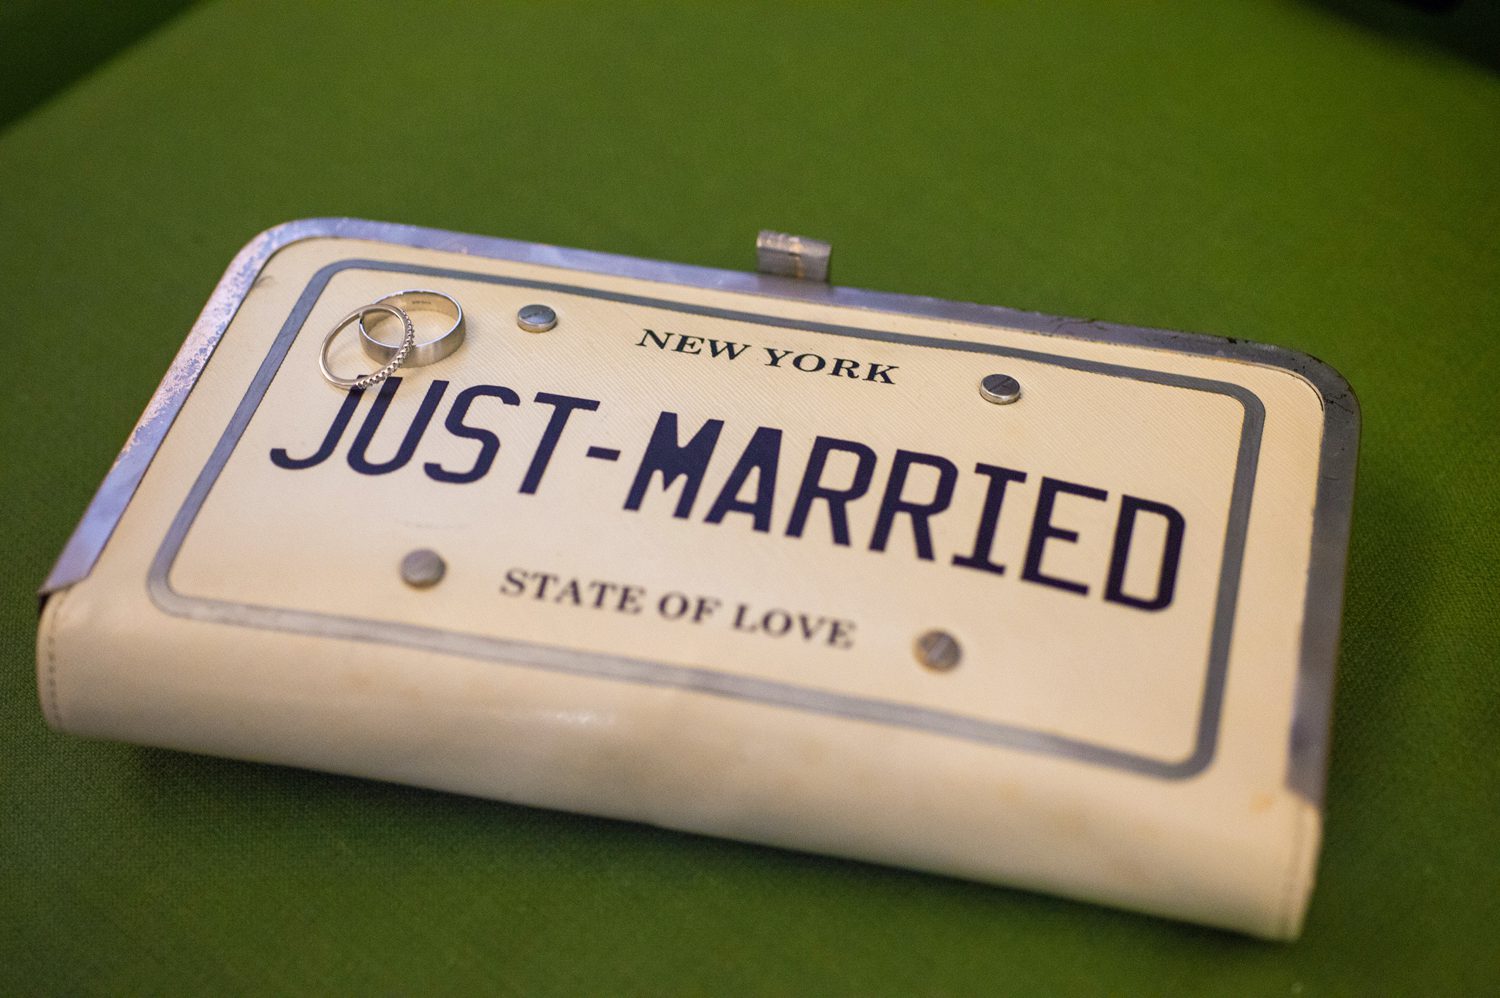 Just Married Purse